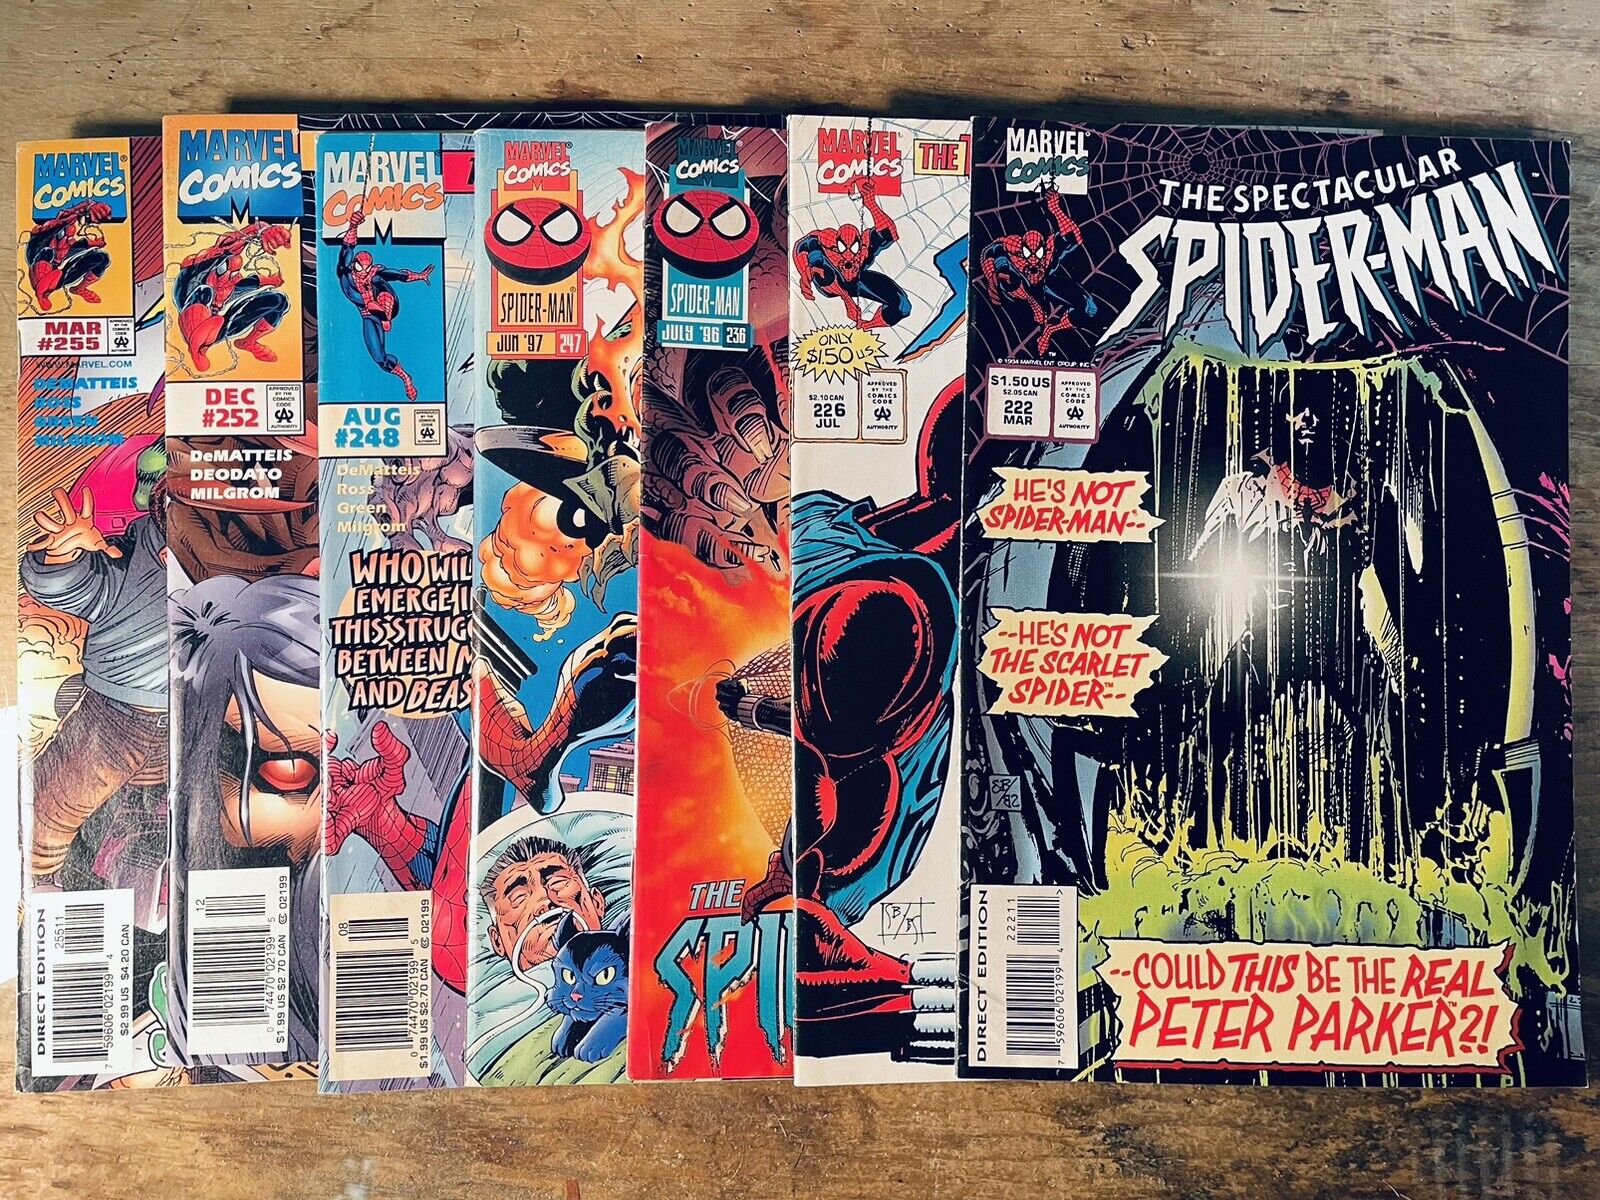 SPECTACULAR SPIDER-MAN #222 226 236 247 248 252 255 LATE RUN LOT OF 7 MARVEL